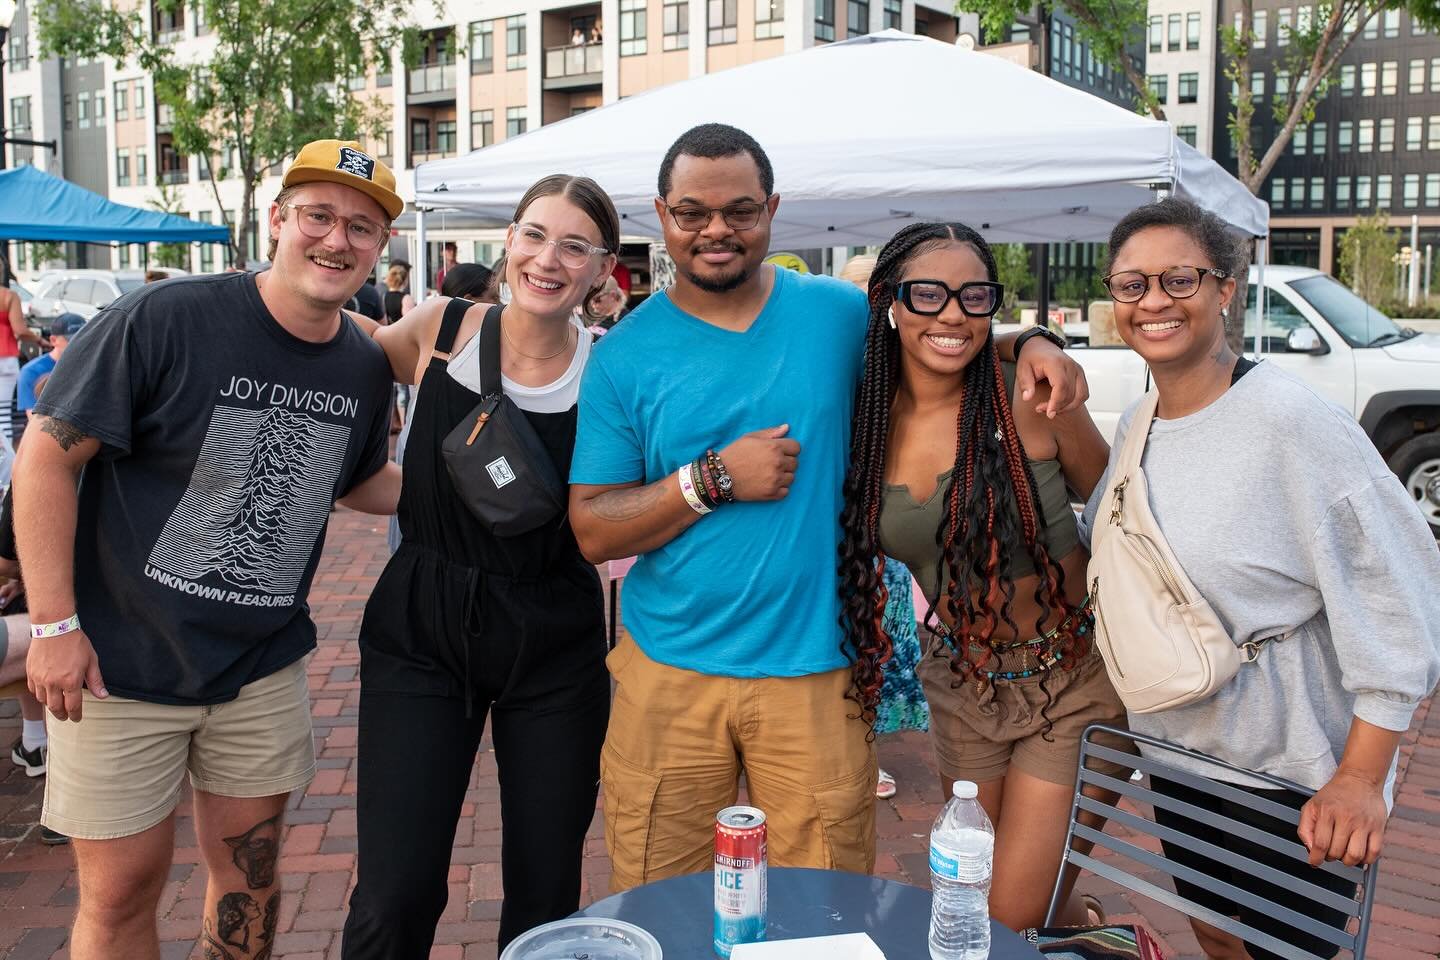 Parties at the pier are back next week! 🥳🎉 We are looking forward to an evening of live music, food trucks, local vendors, and good times with all of YOU at our first &ldquo;Third Thursday&rdquo; event of the year.

📆 Thursday, April 18th from 6:0